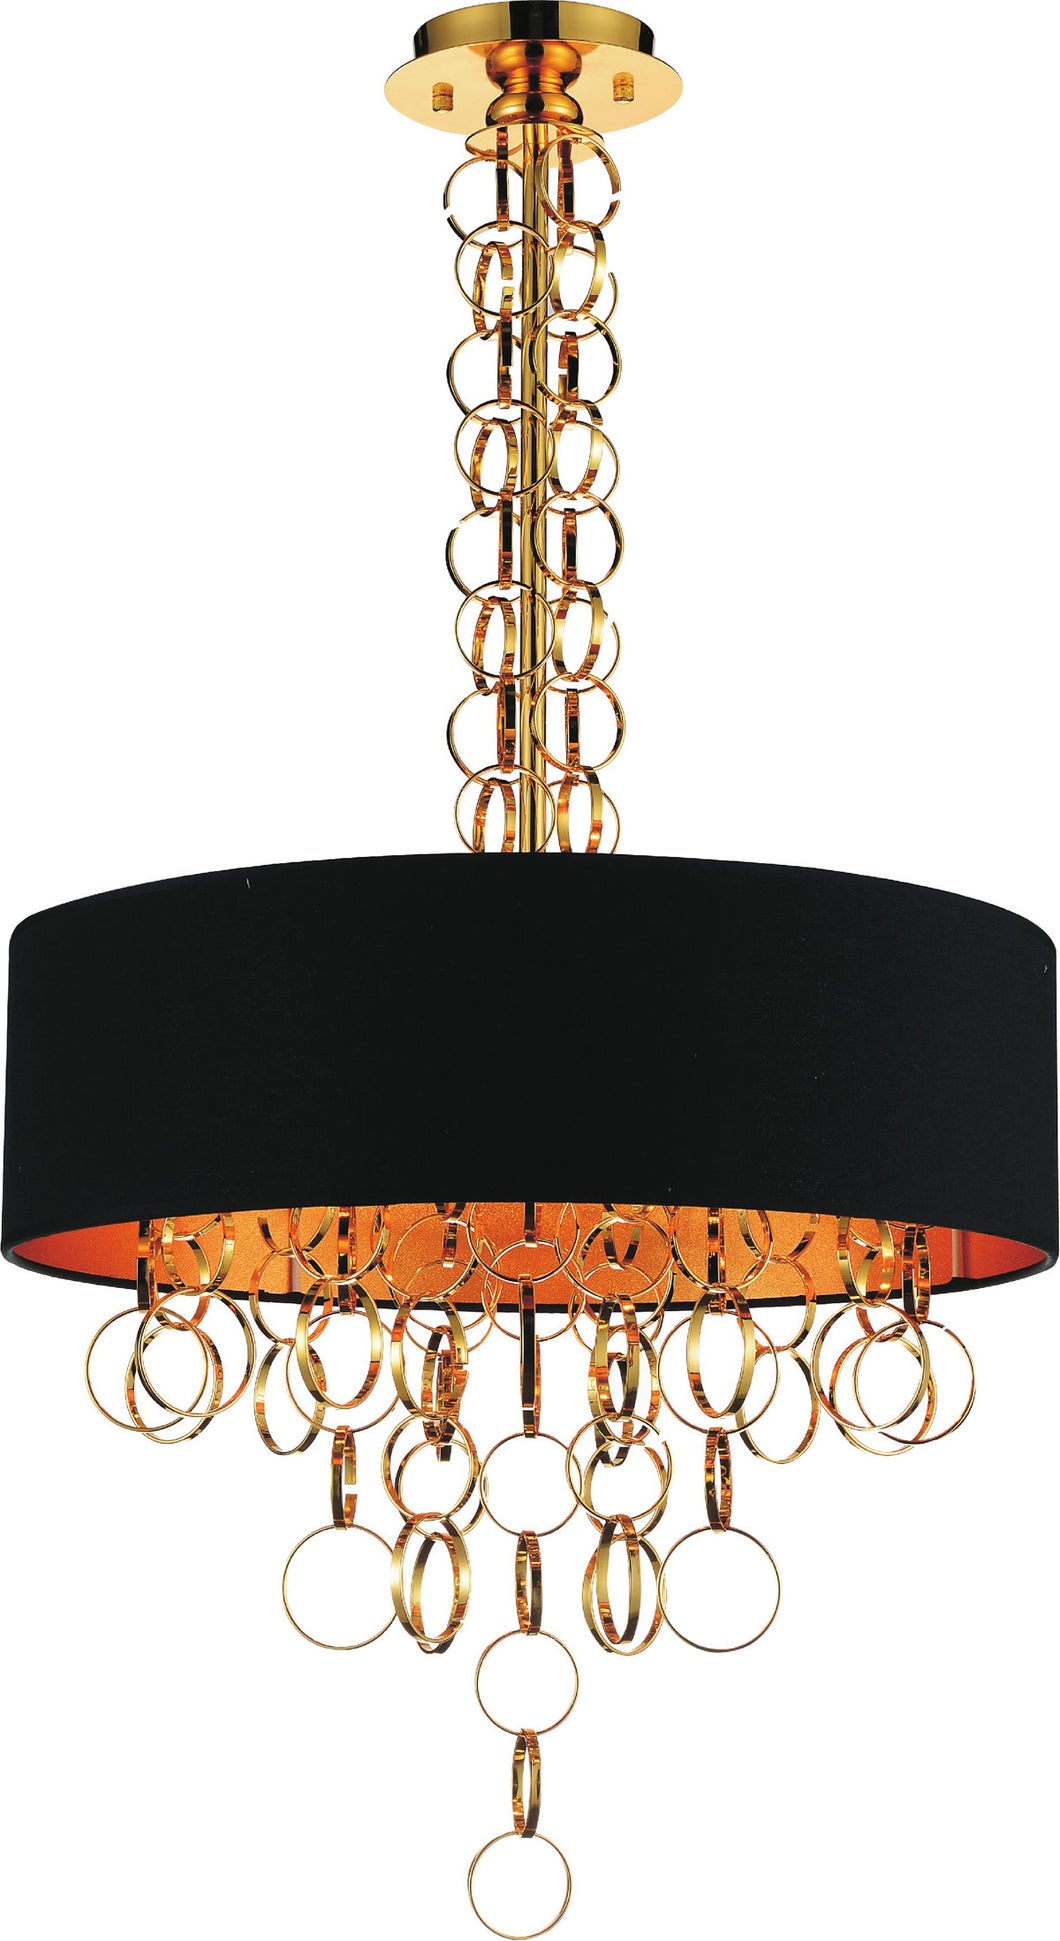 6 Light Drum Shade Chandelier with Gold finish